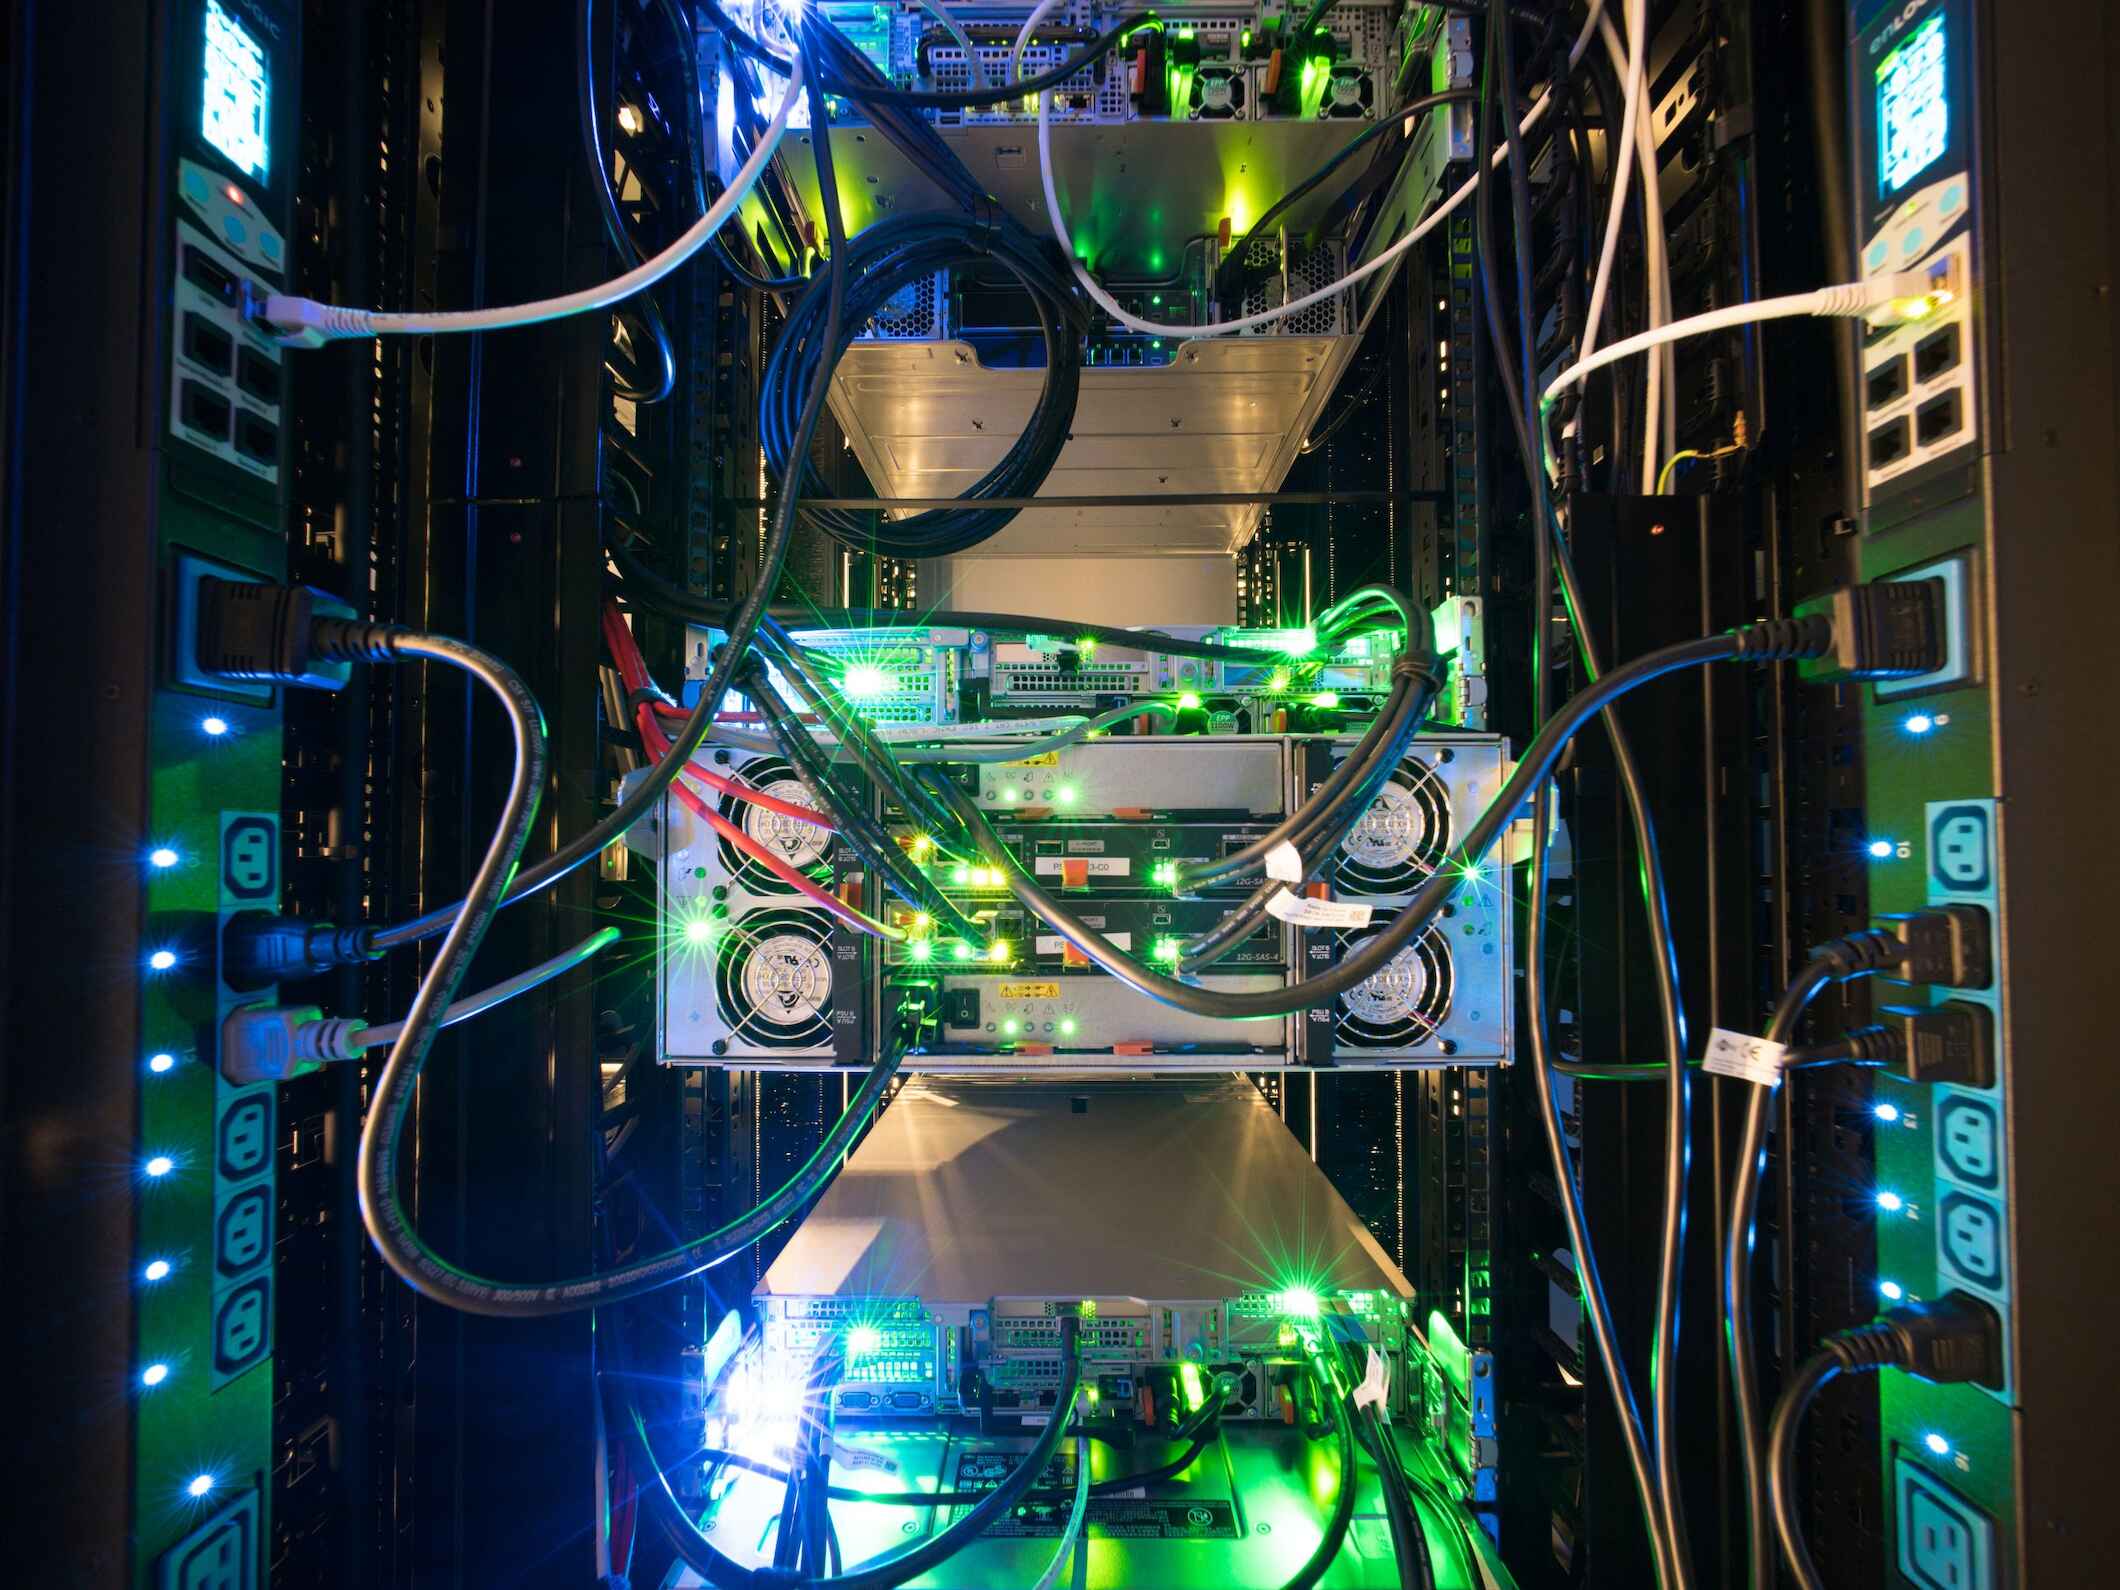 The computers in the server room of the MPI for Intelligent Systems in Tübingen provide the power to run the AI software, which is often very CPU intensive.